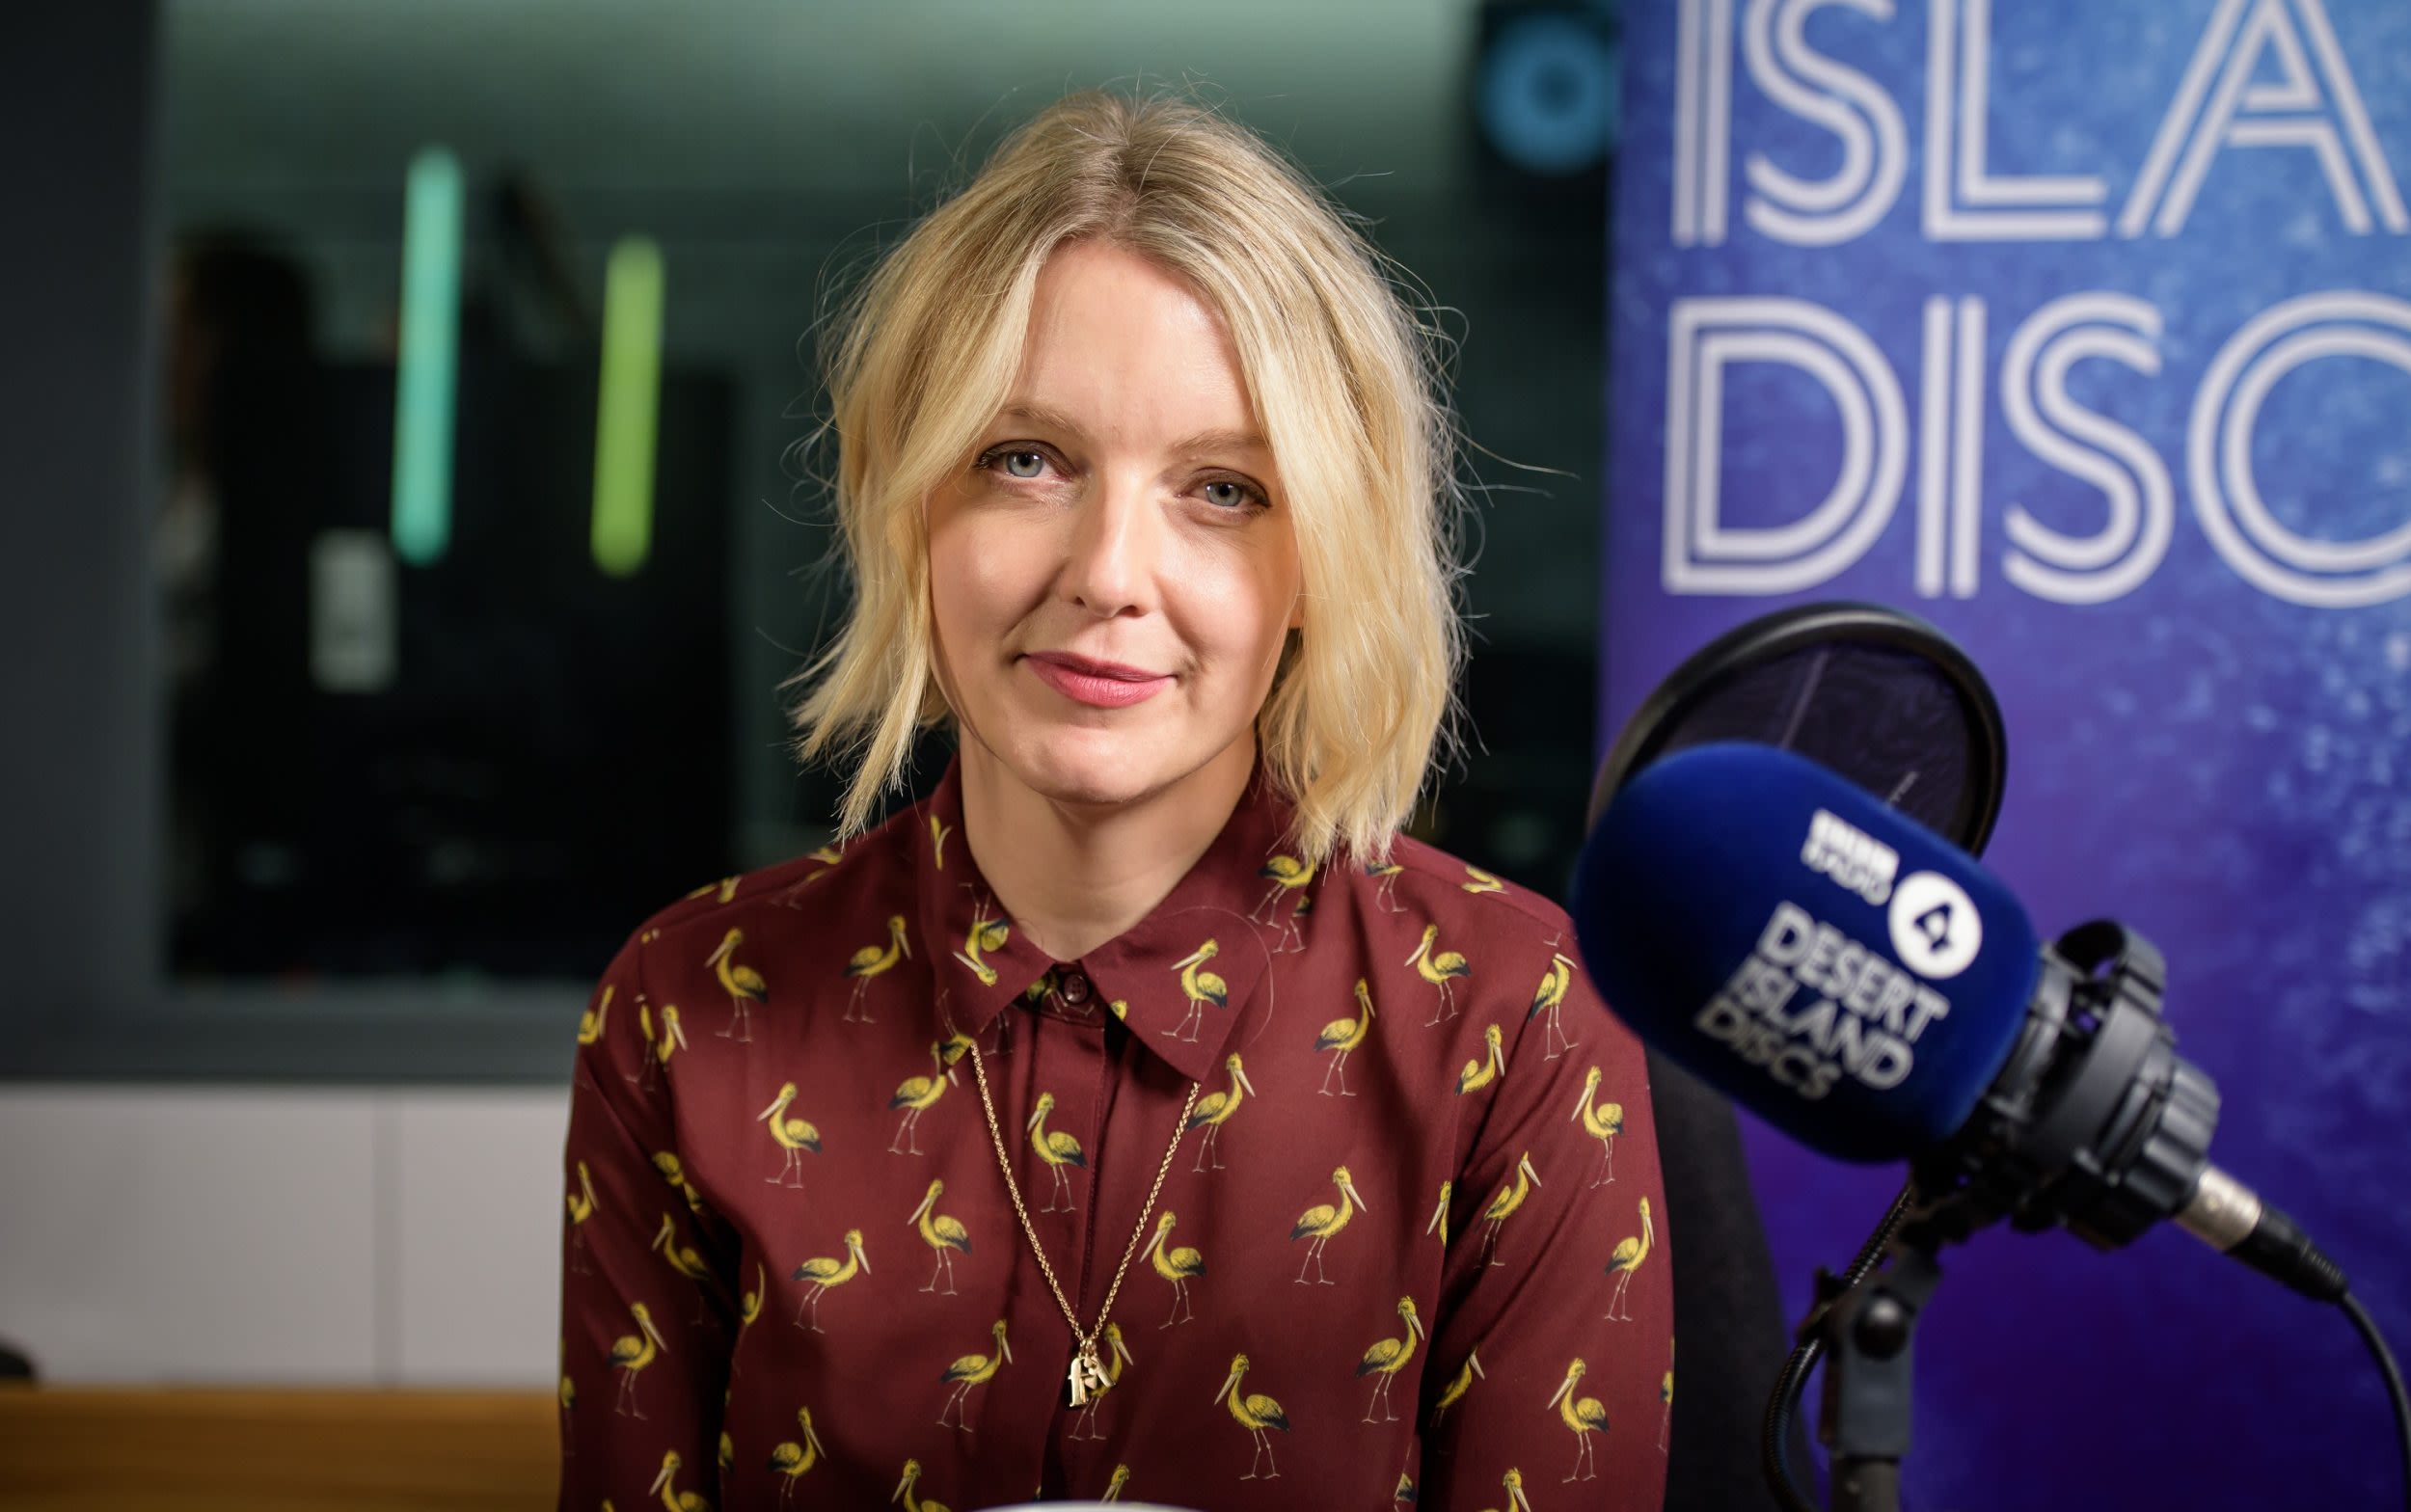 It’s time to lay off Lauren Laverne – she’s grown into her role on Desert Island Discs